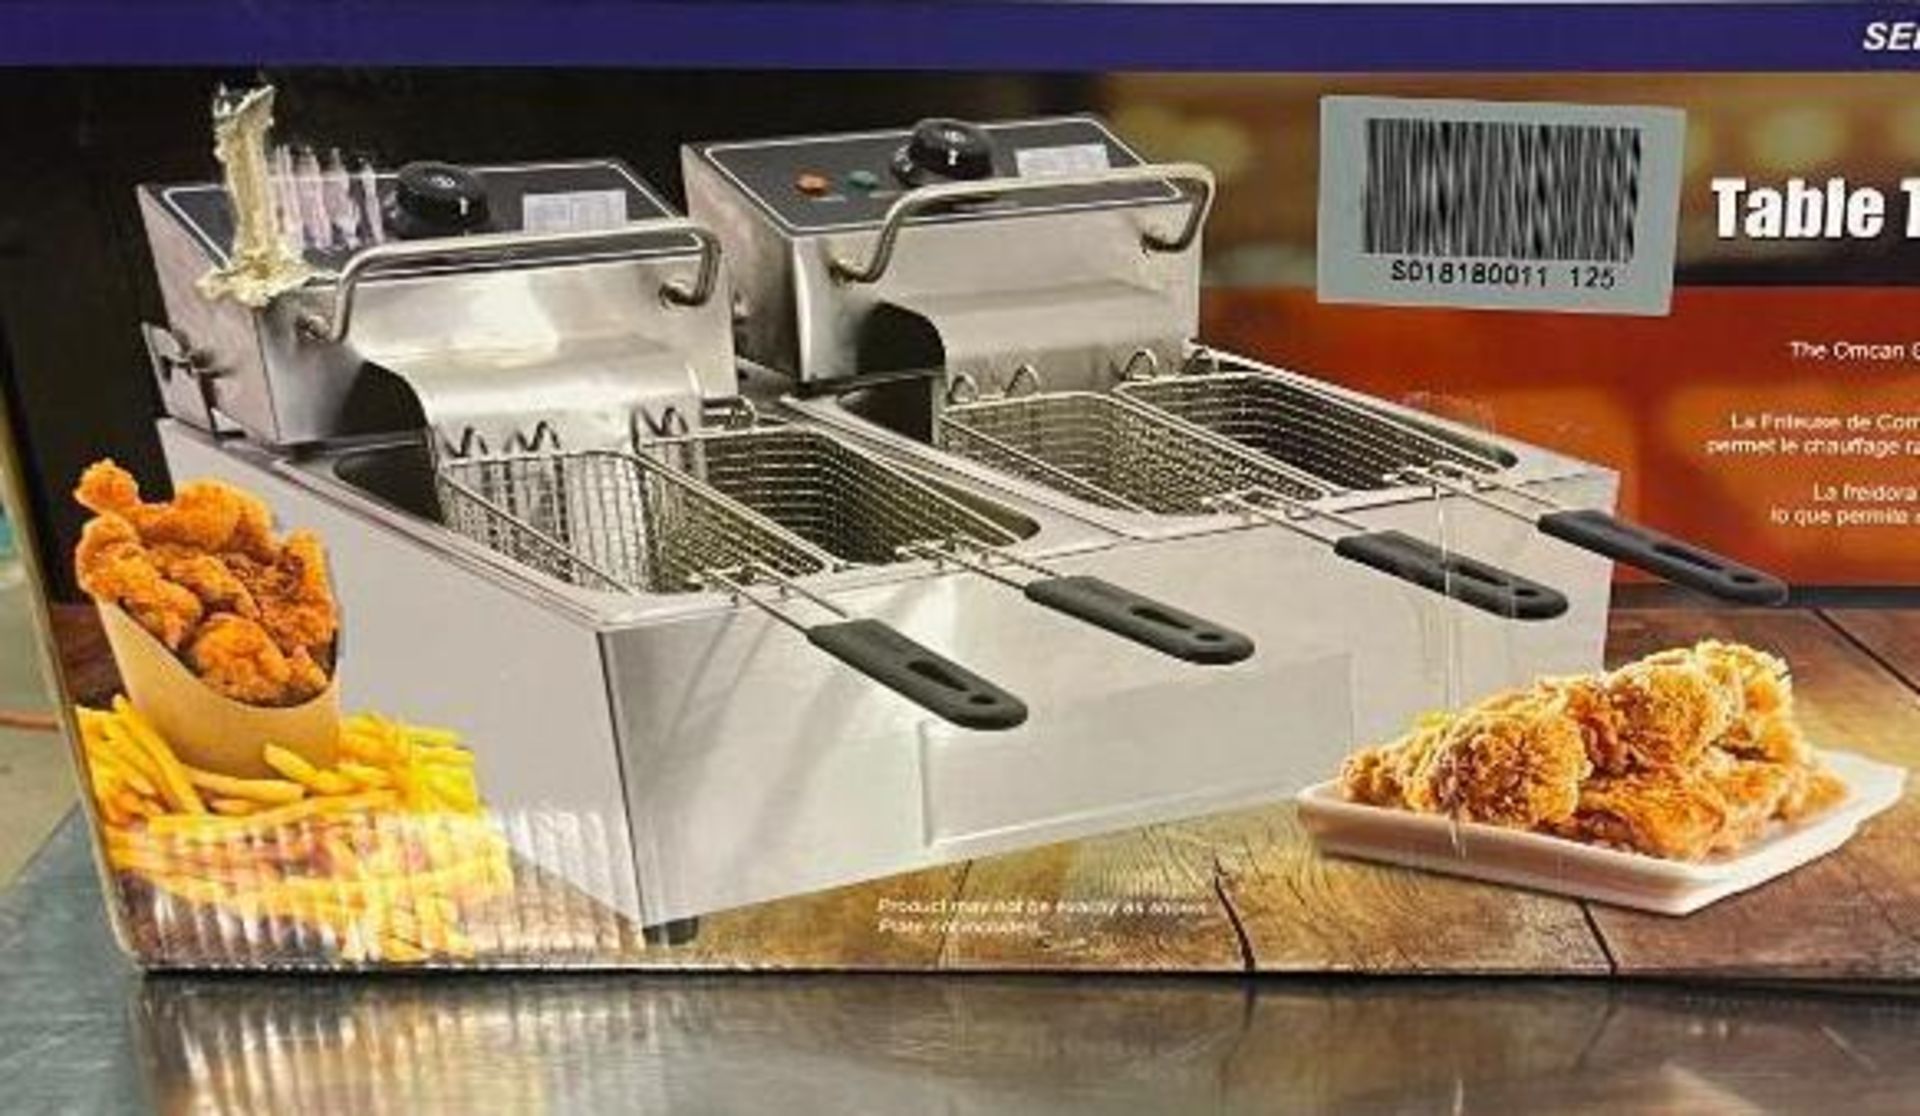 NEW DOUBLE TABLETOP ELECTRIC DEEP FRYER OMCAN 34868 - Image 2 of 3